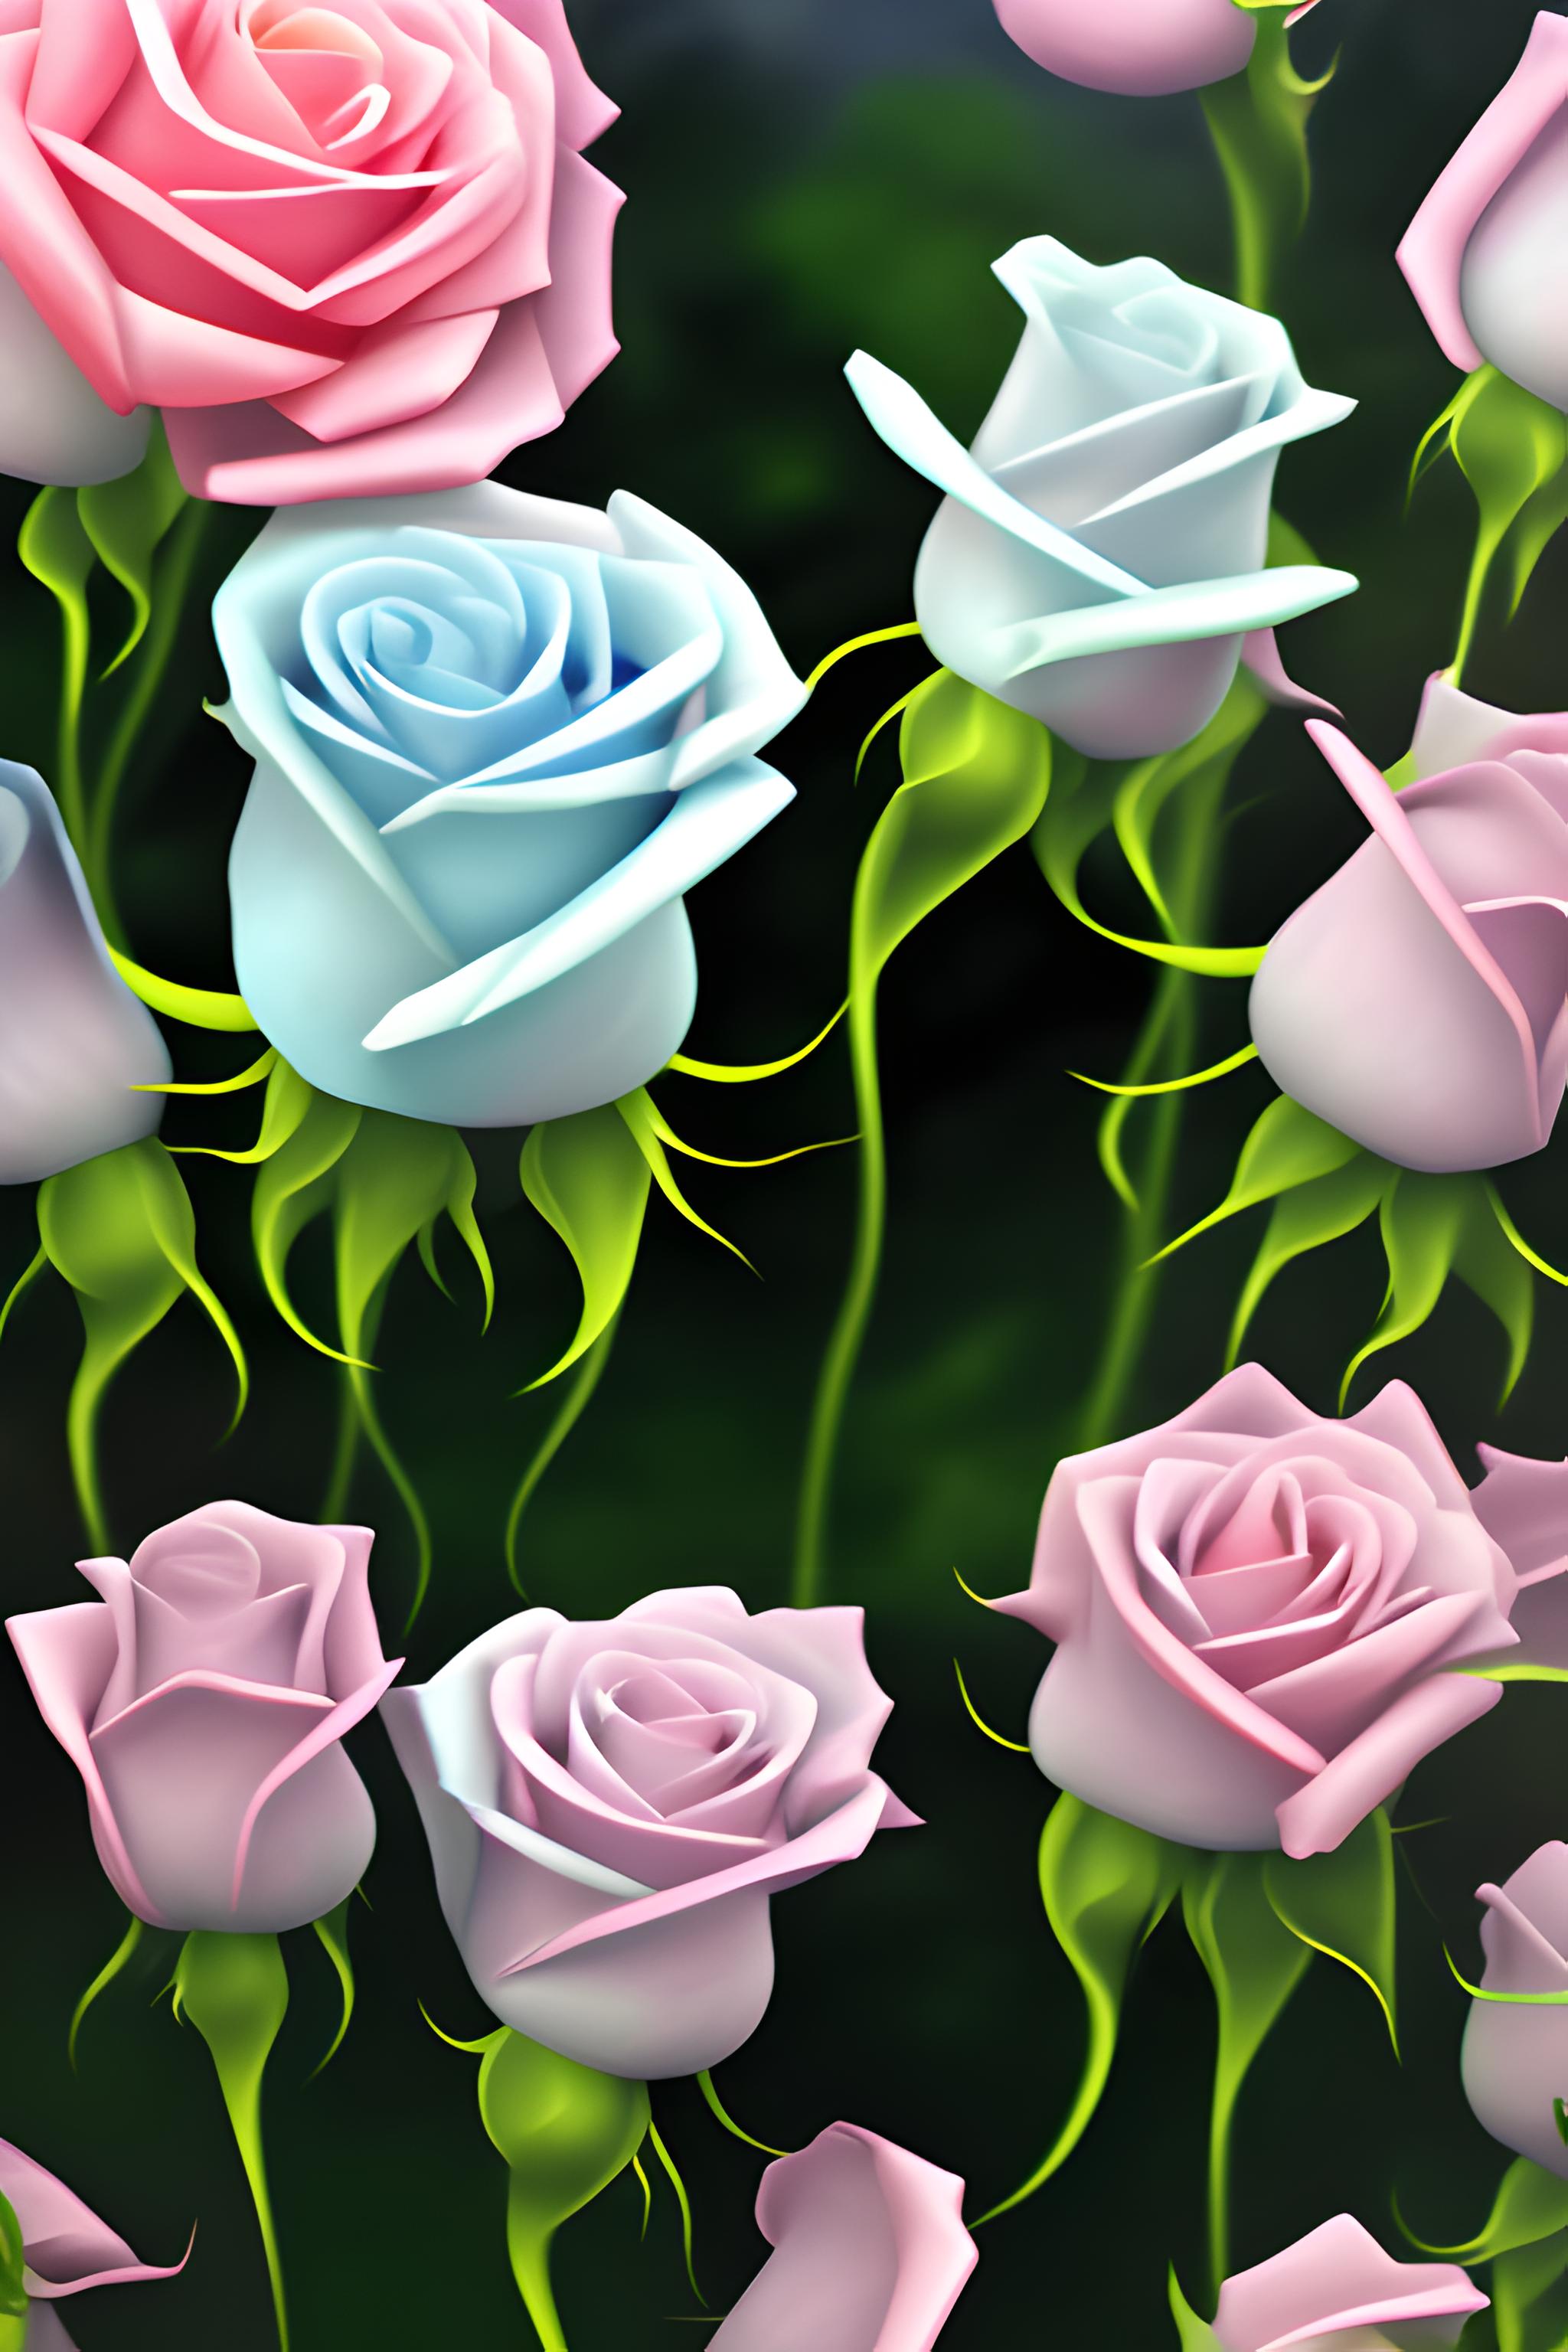 Red Rose Live Wallpaper APK - Free download app for Android